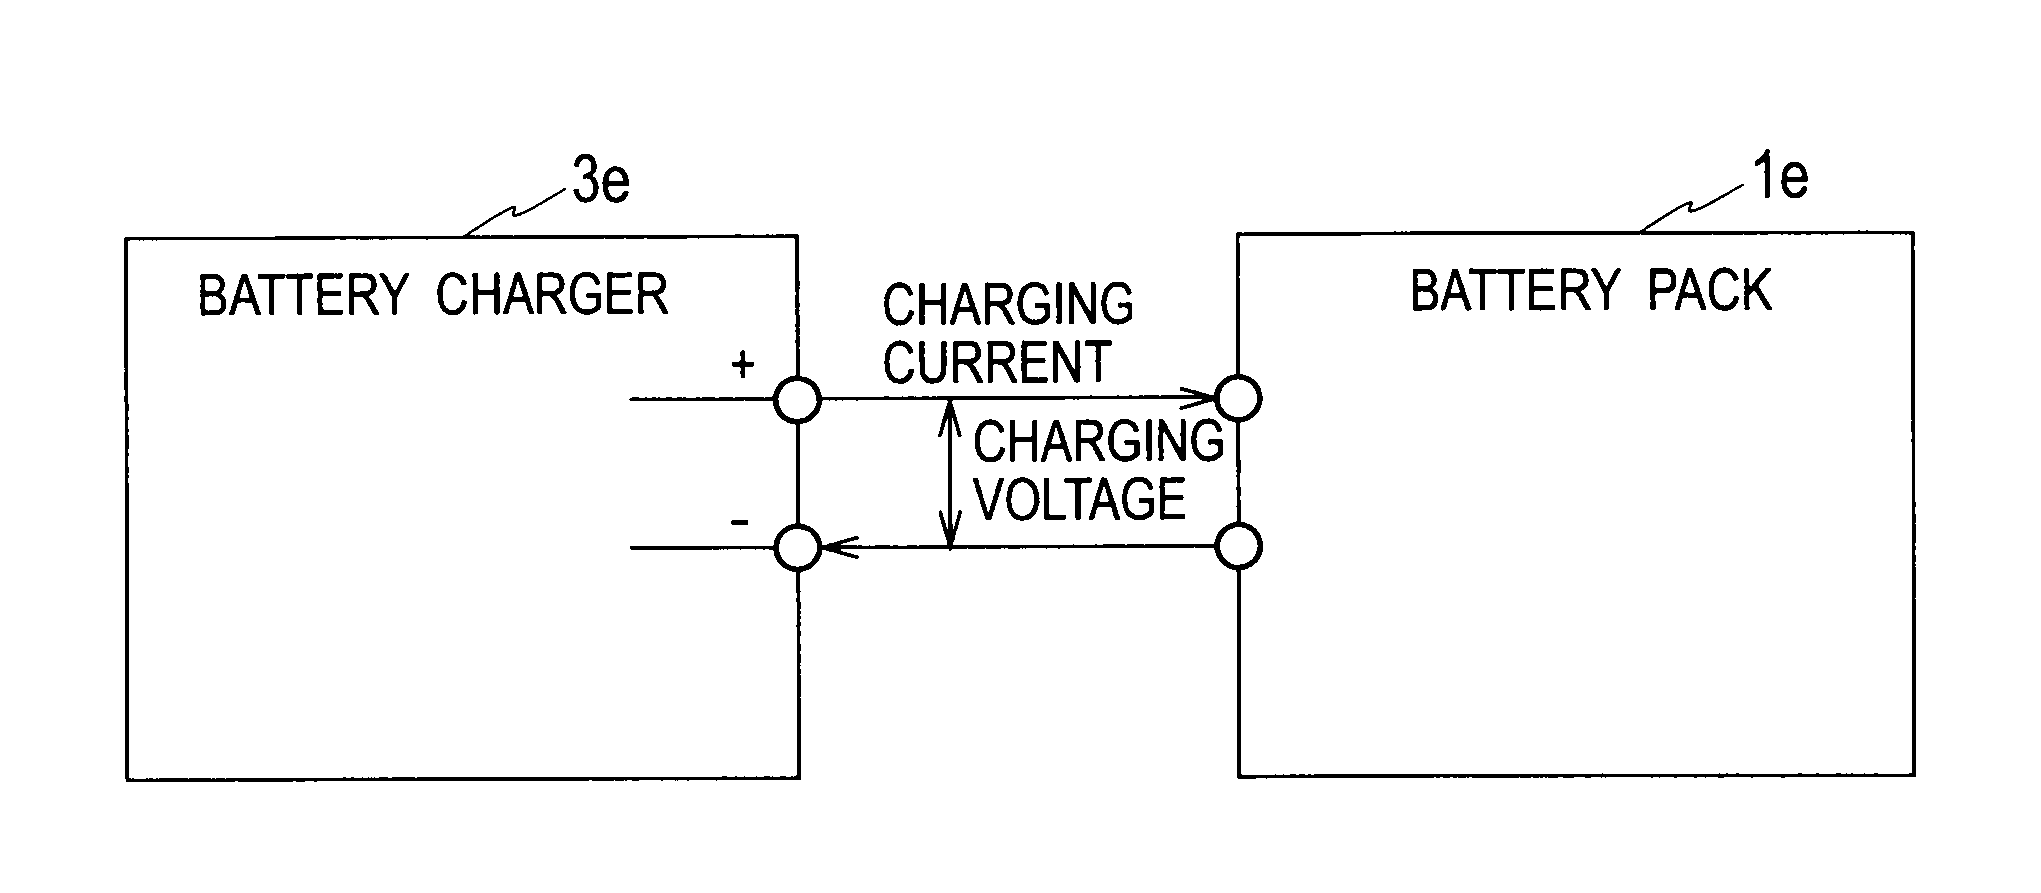 Battery pack, battery charger, and battery pack system